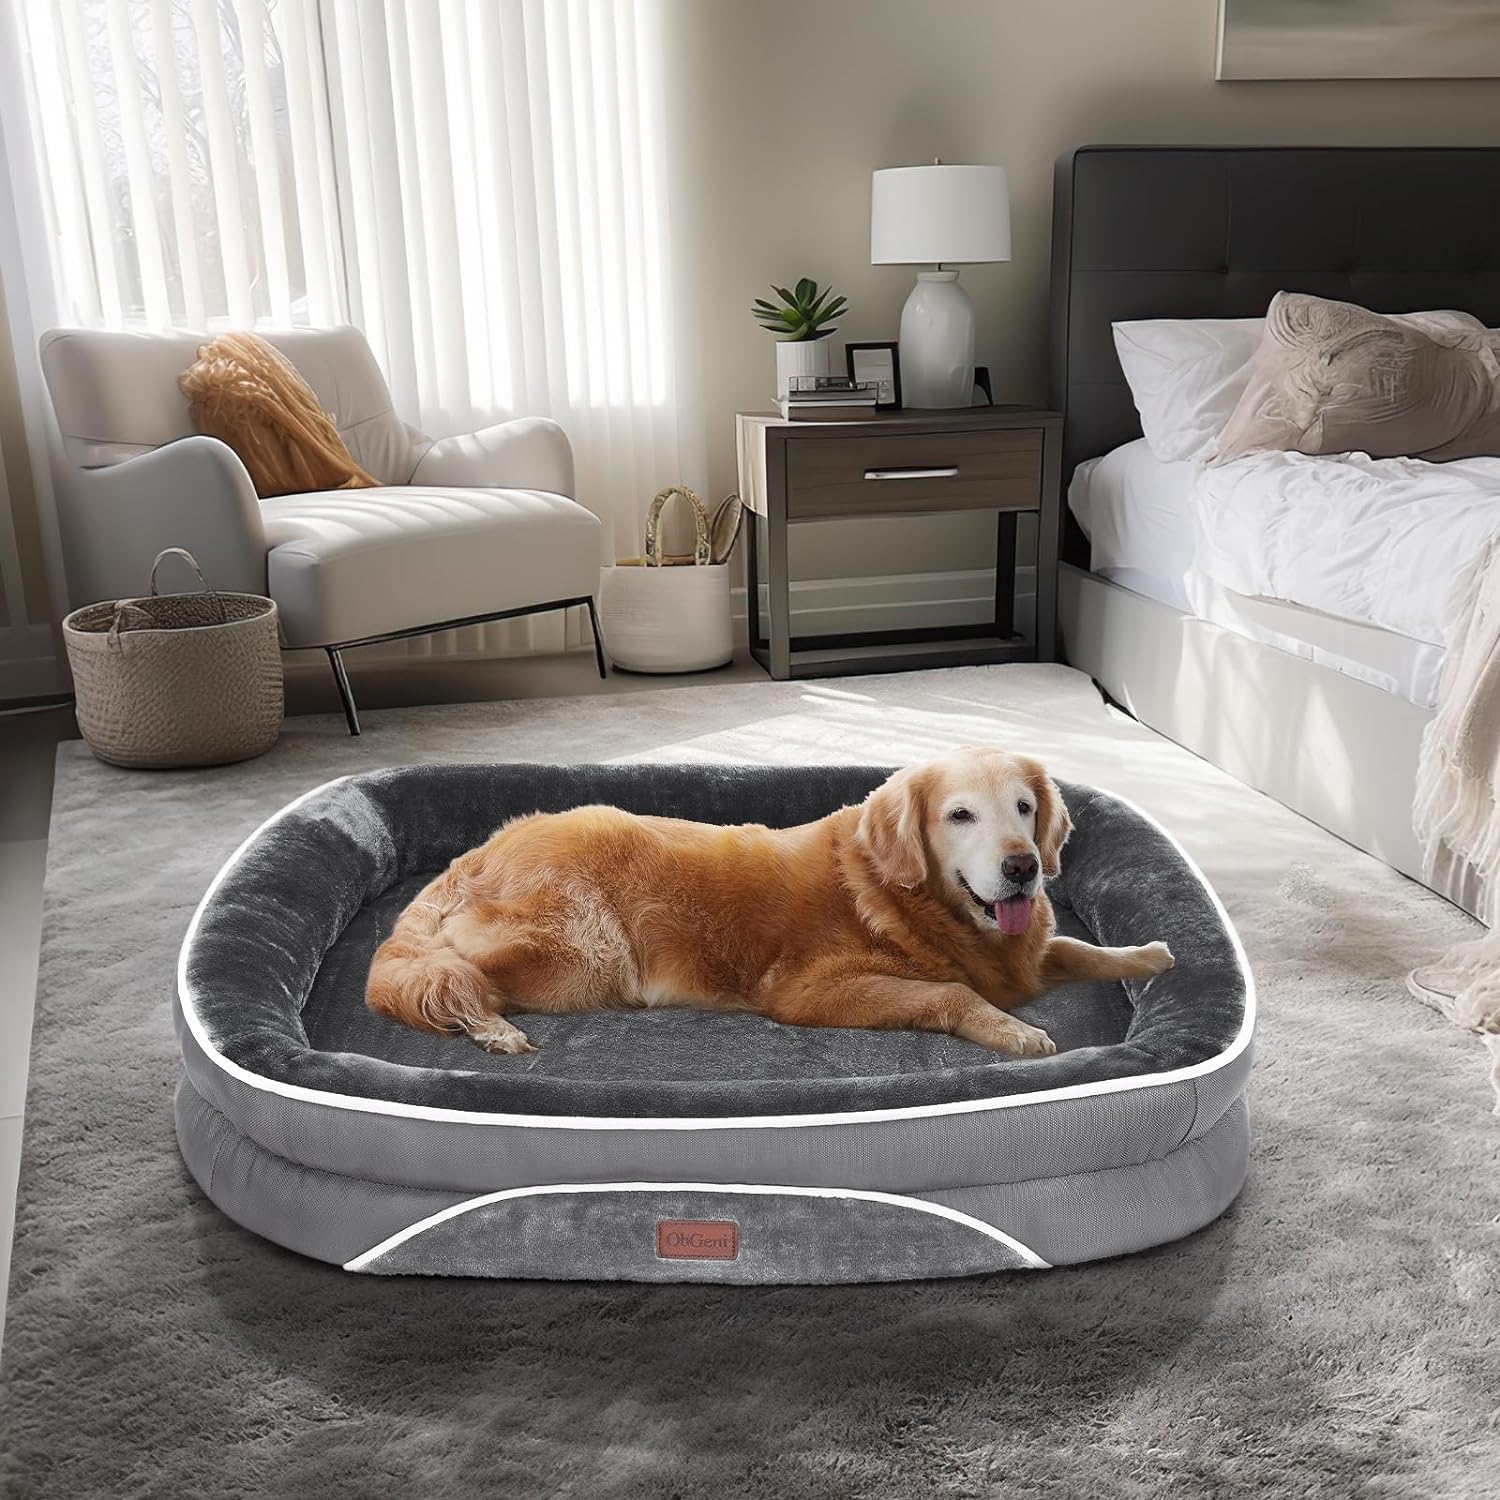 OhGeni Orthopedic Dog Bed for Large Dogs, Oversized Couch Design with Egg Foam Support, Removable, Machine Washable Plush Cover and Non-Slip Bottom with Four Sided Bolster Cushion (Gray)